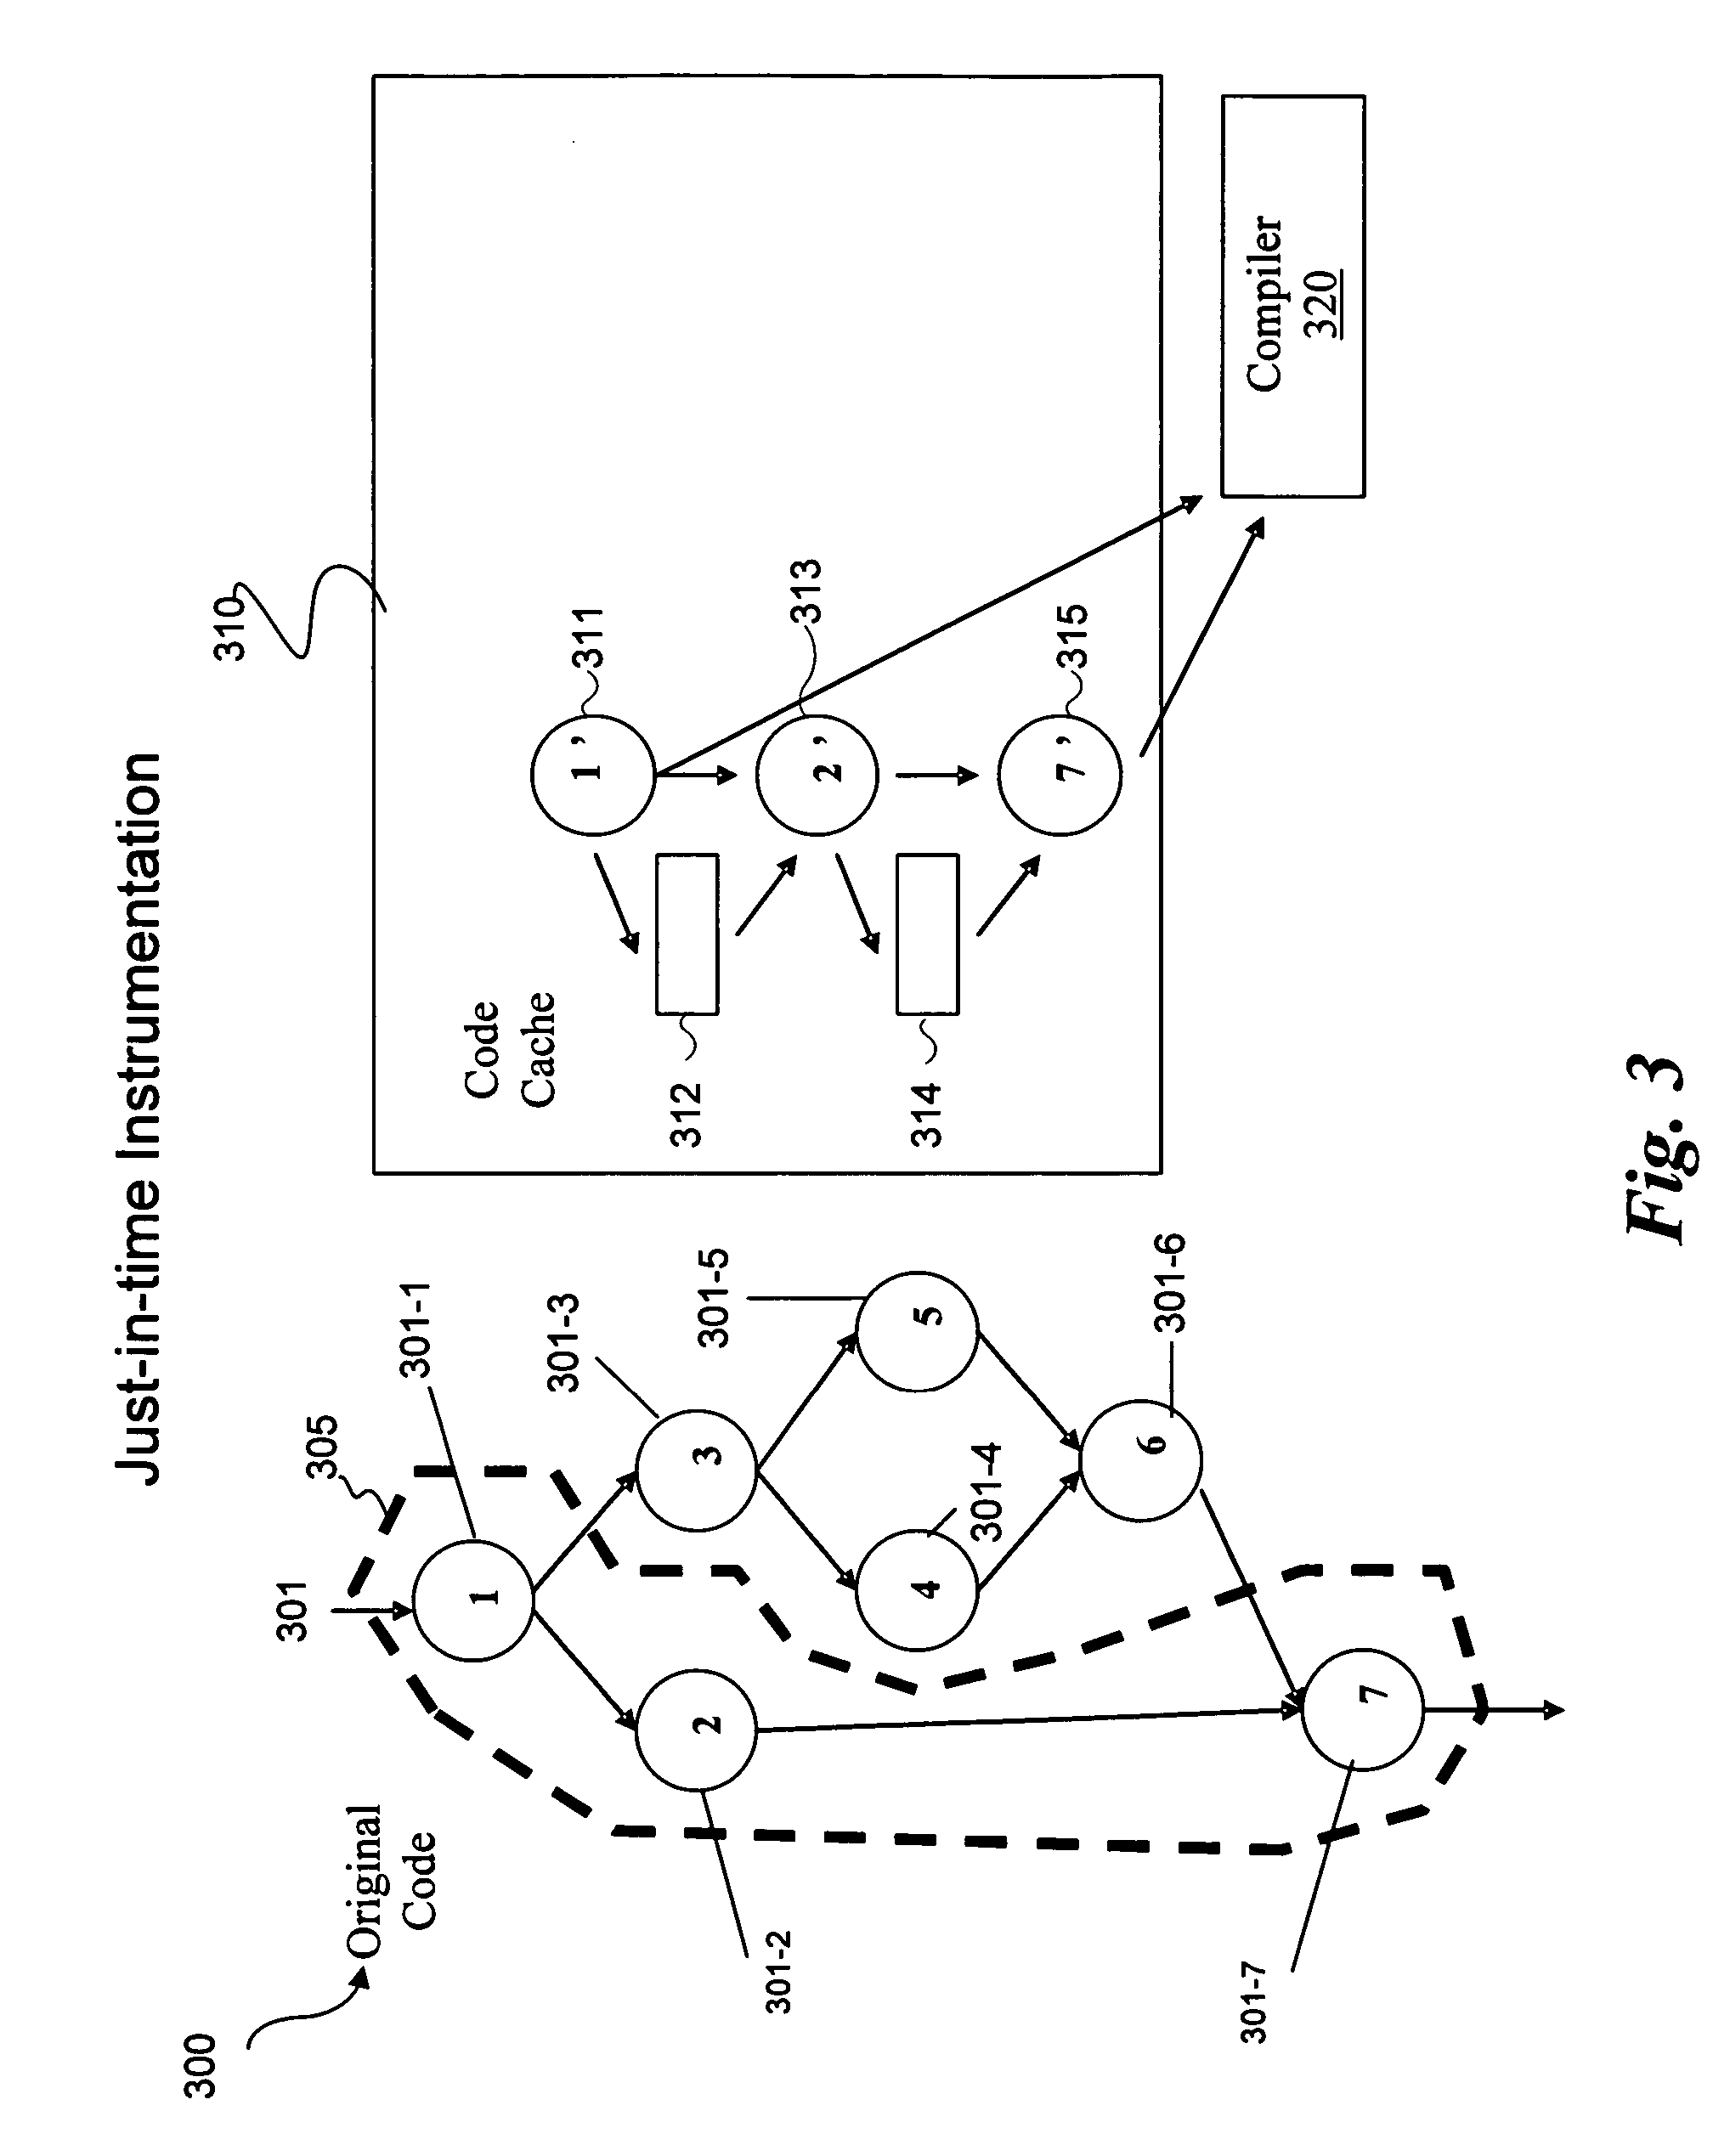 System and method to instrument references to shared memory